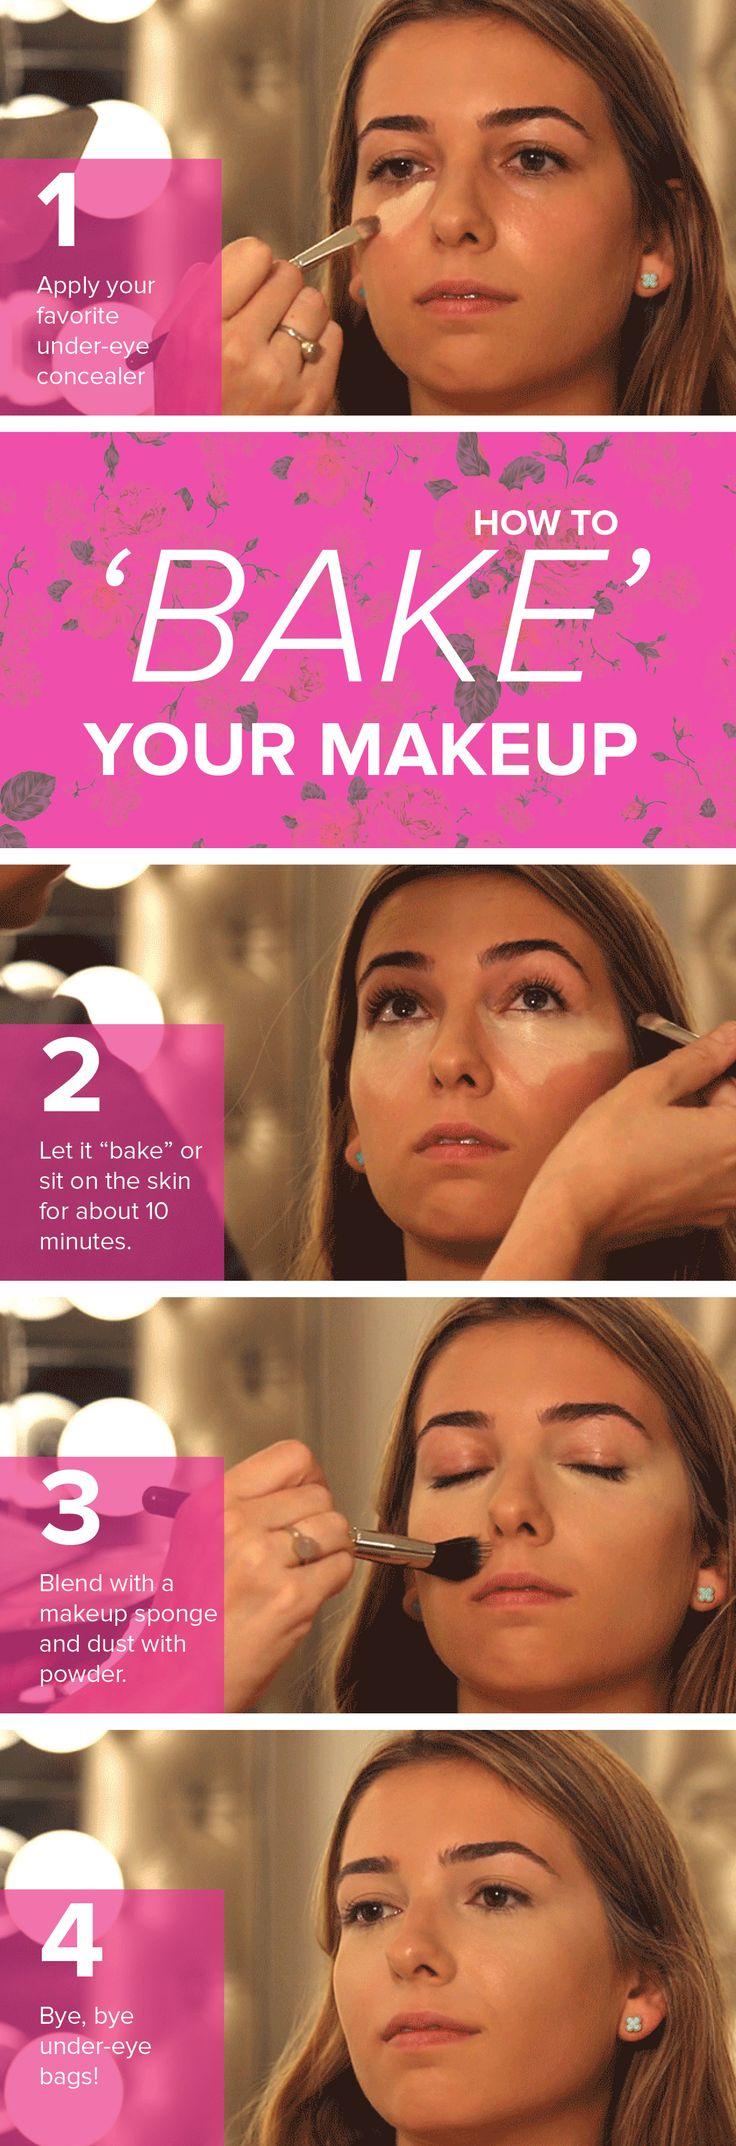 Wedding - Here's What 'baking' Has To Do With Your Daily Makeup Routine